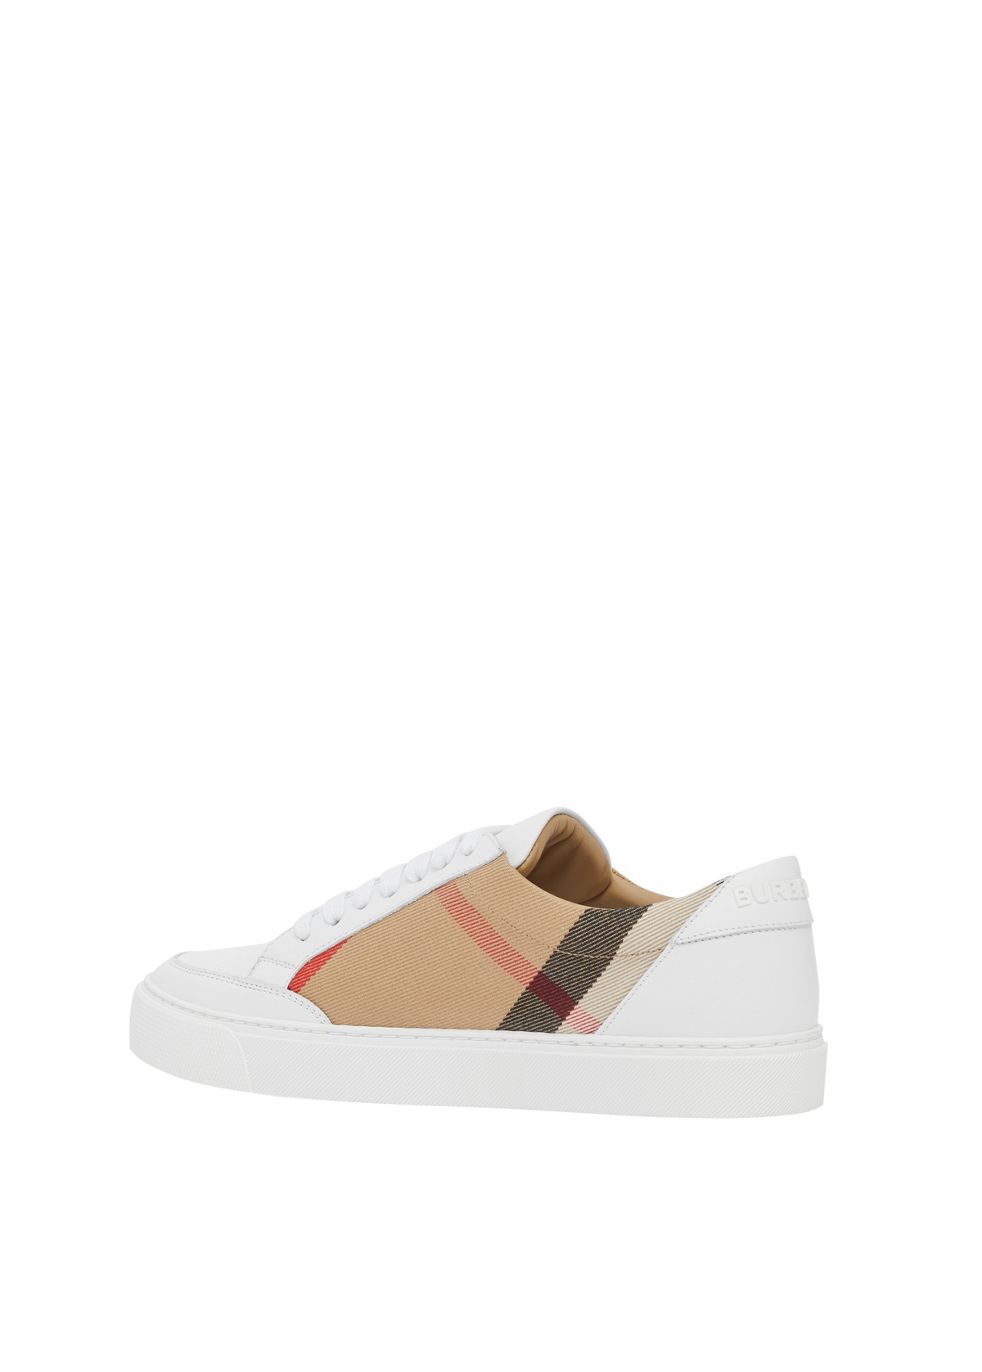 Burberry House Check and Leather Sneakers Trainers | Heathrow Boutique